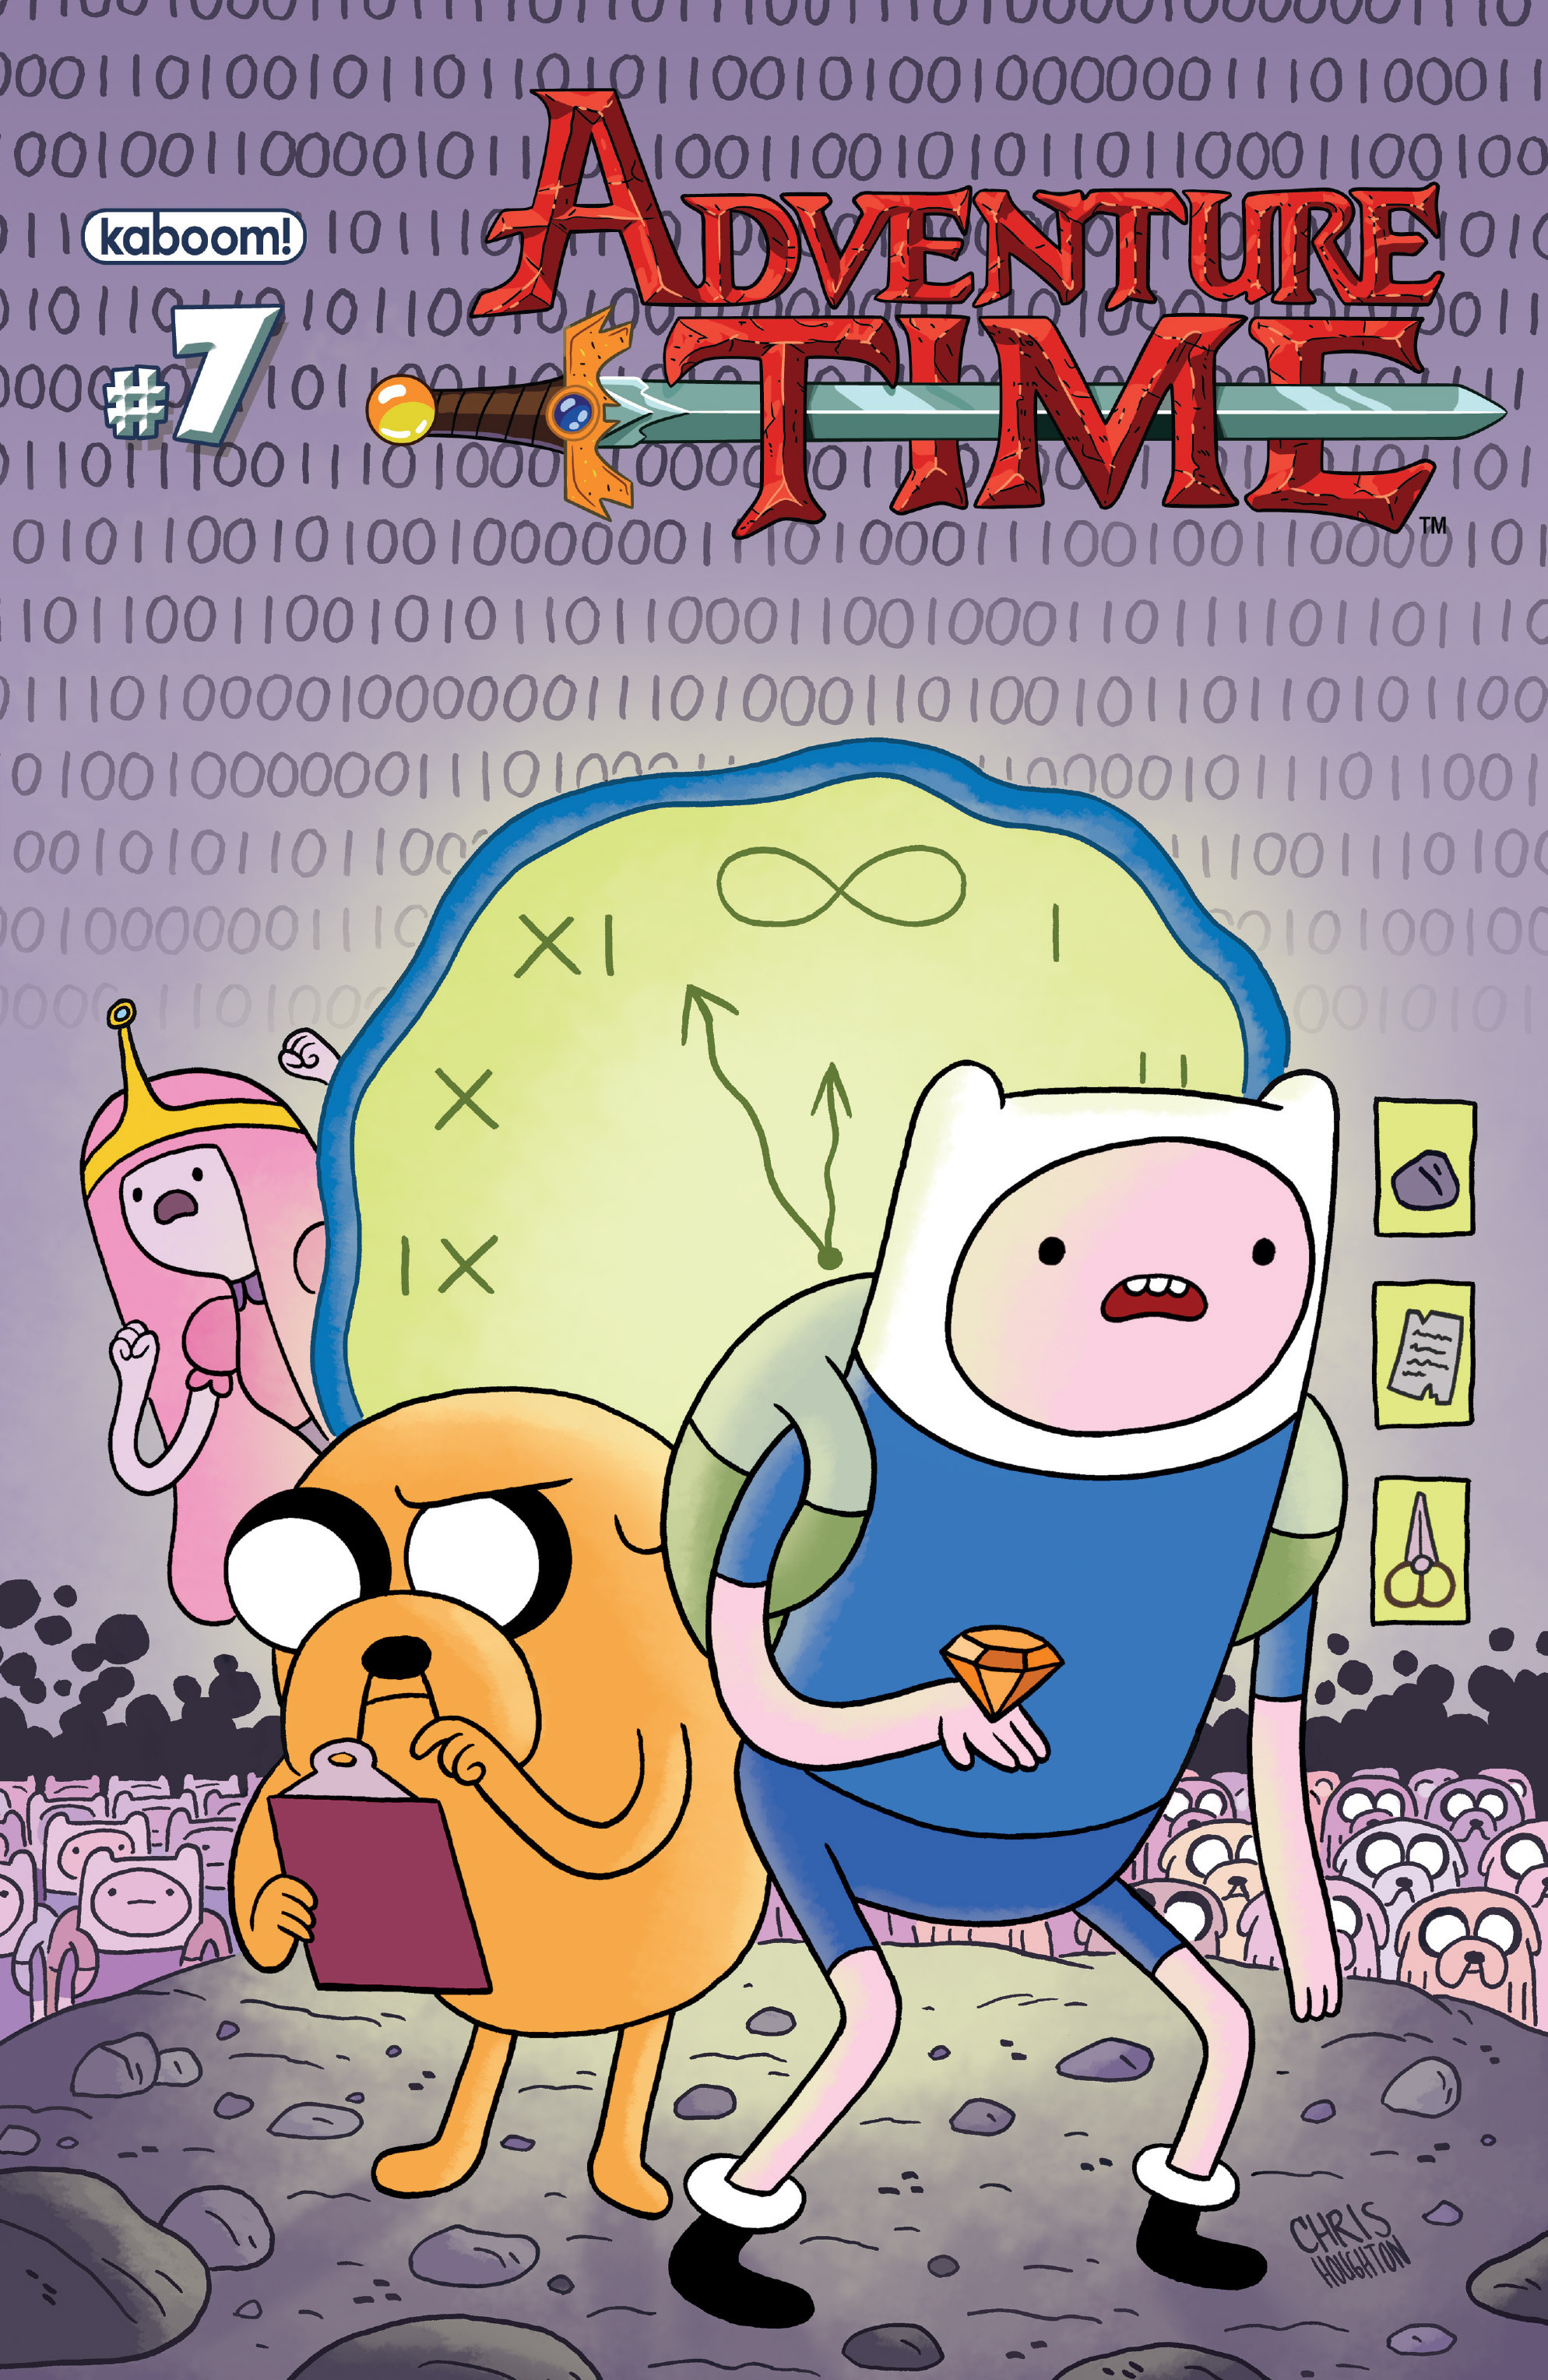 Read online Adventure Time comic -  Issue #7 - 1